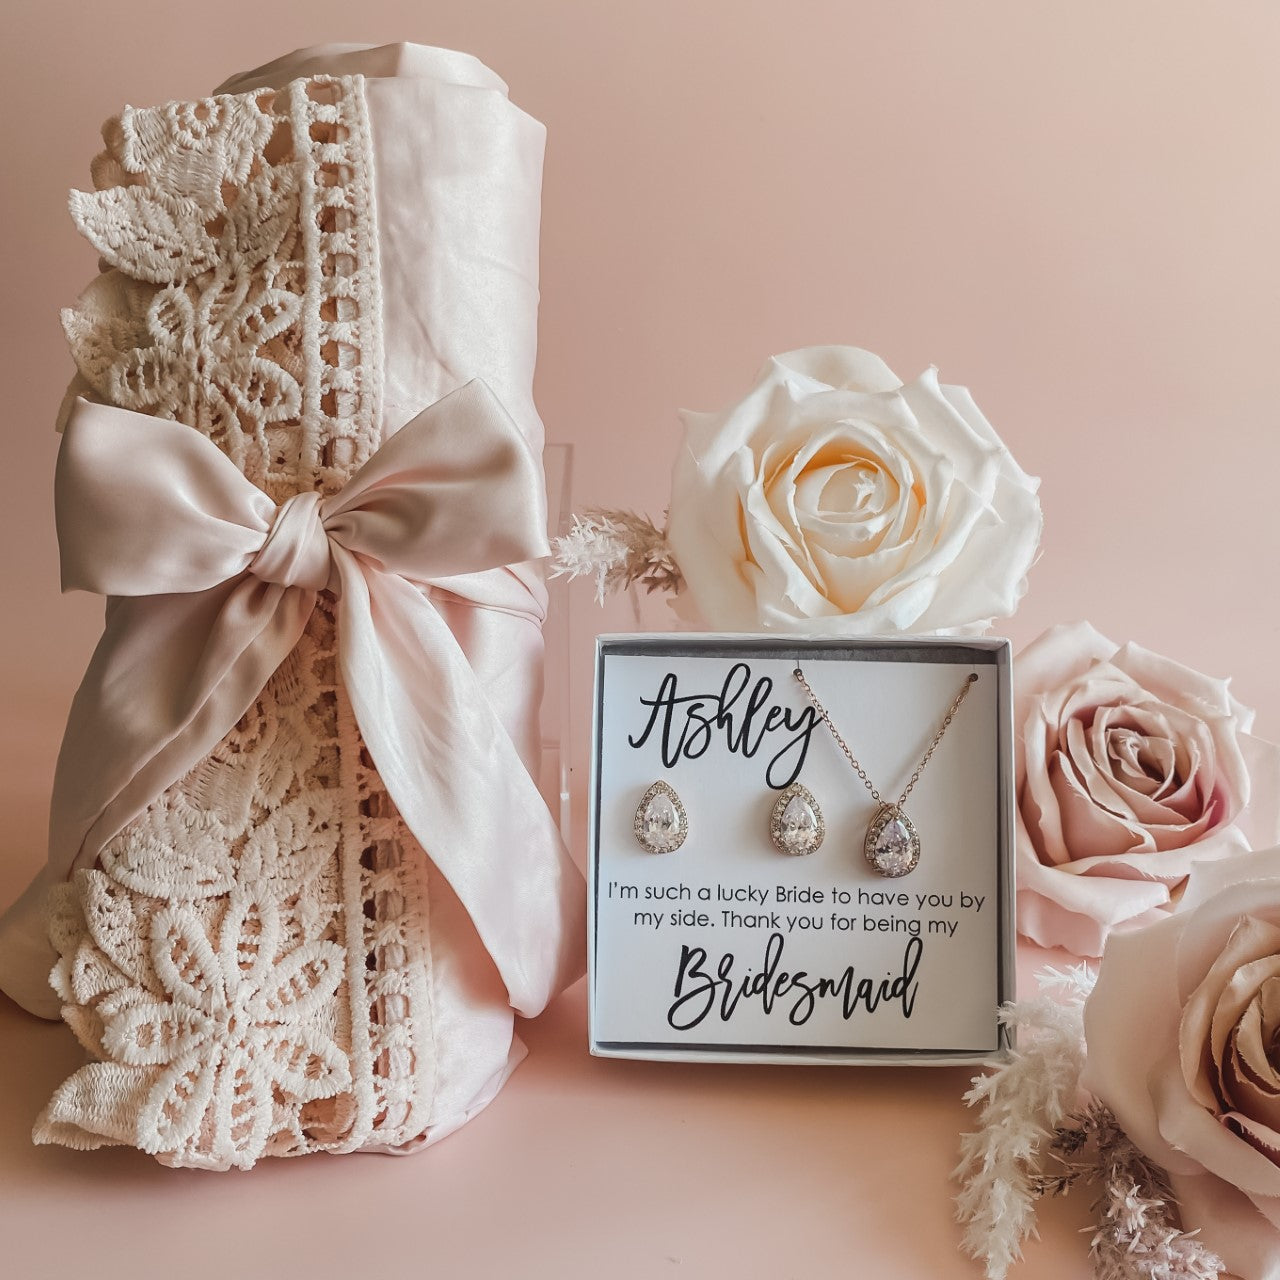 Canadian Bridal gifts